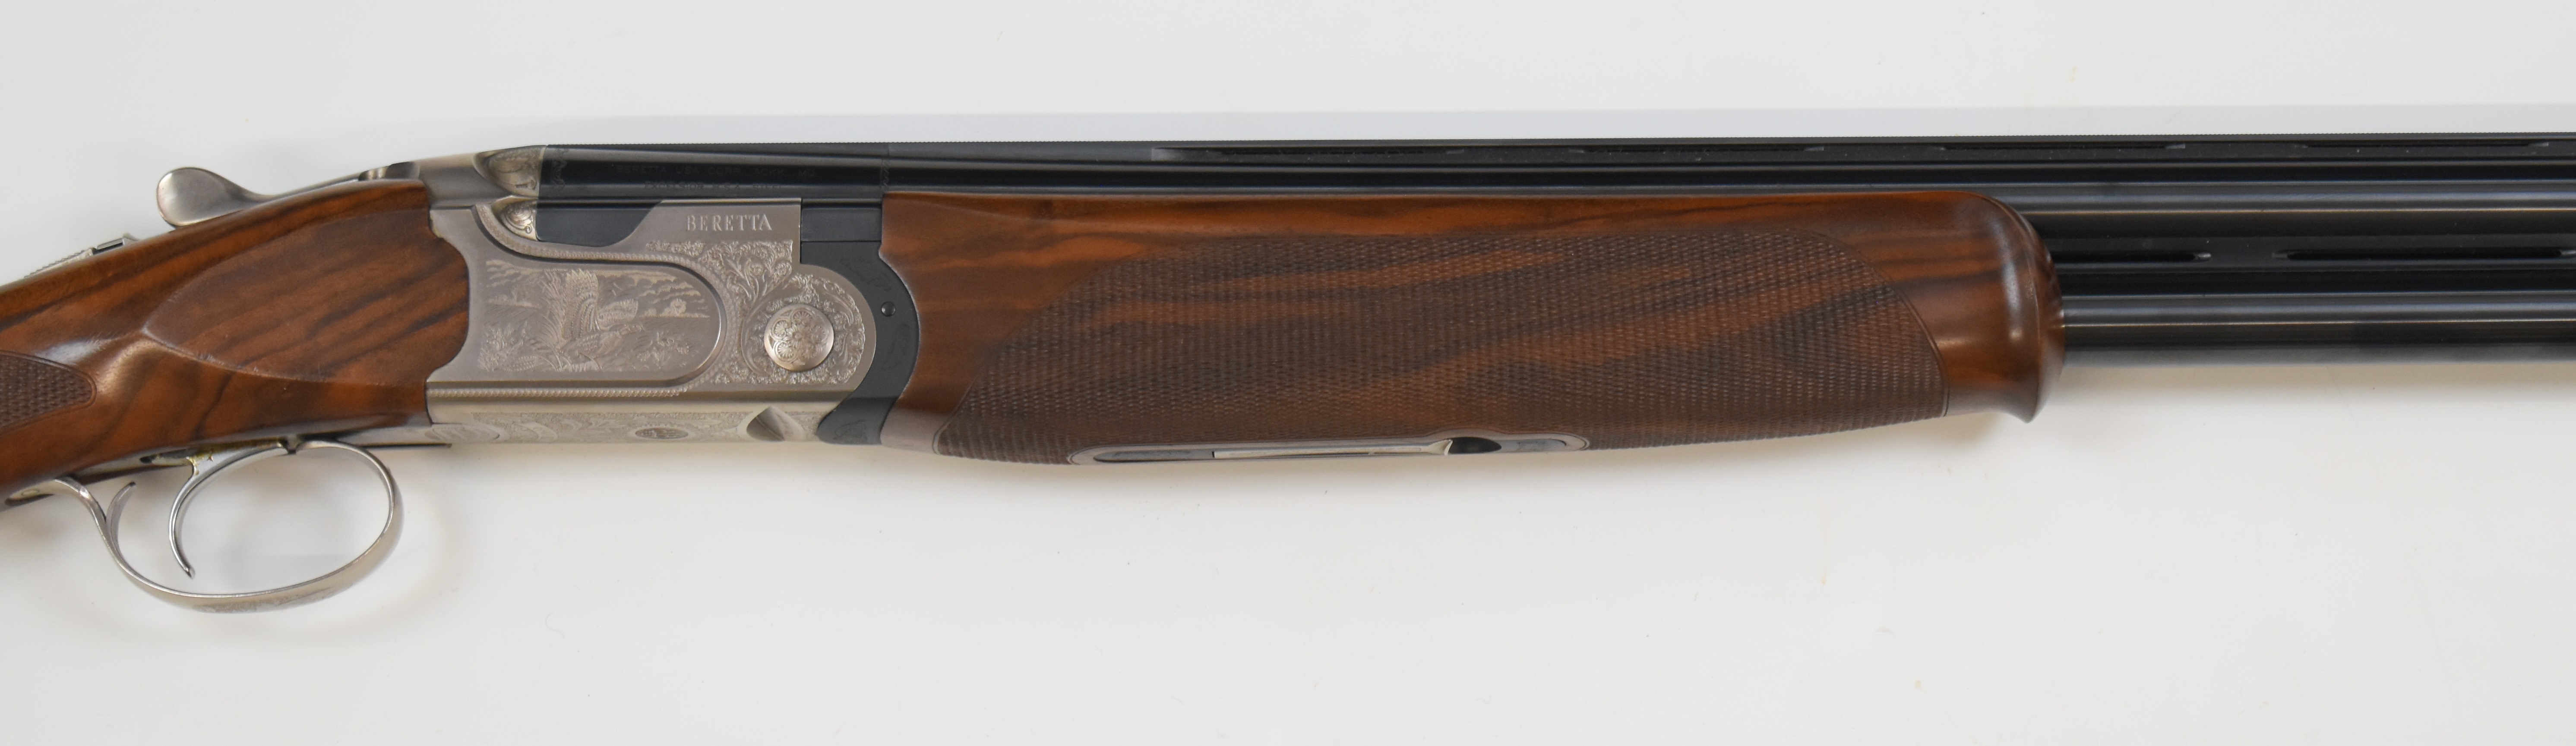 Beretta 690 III Sporting 12 bore over and under ejector shotgun with named and engraved scenes of - Image 4 of 15